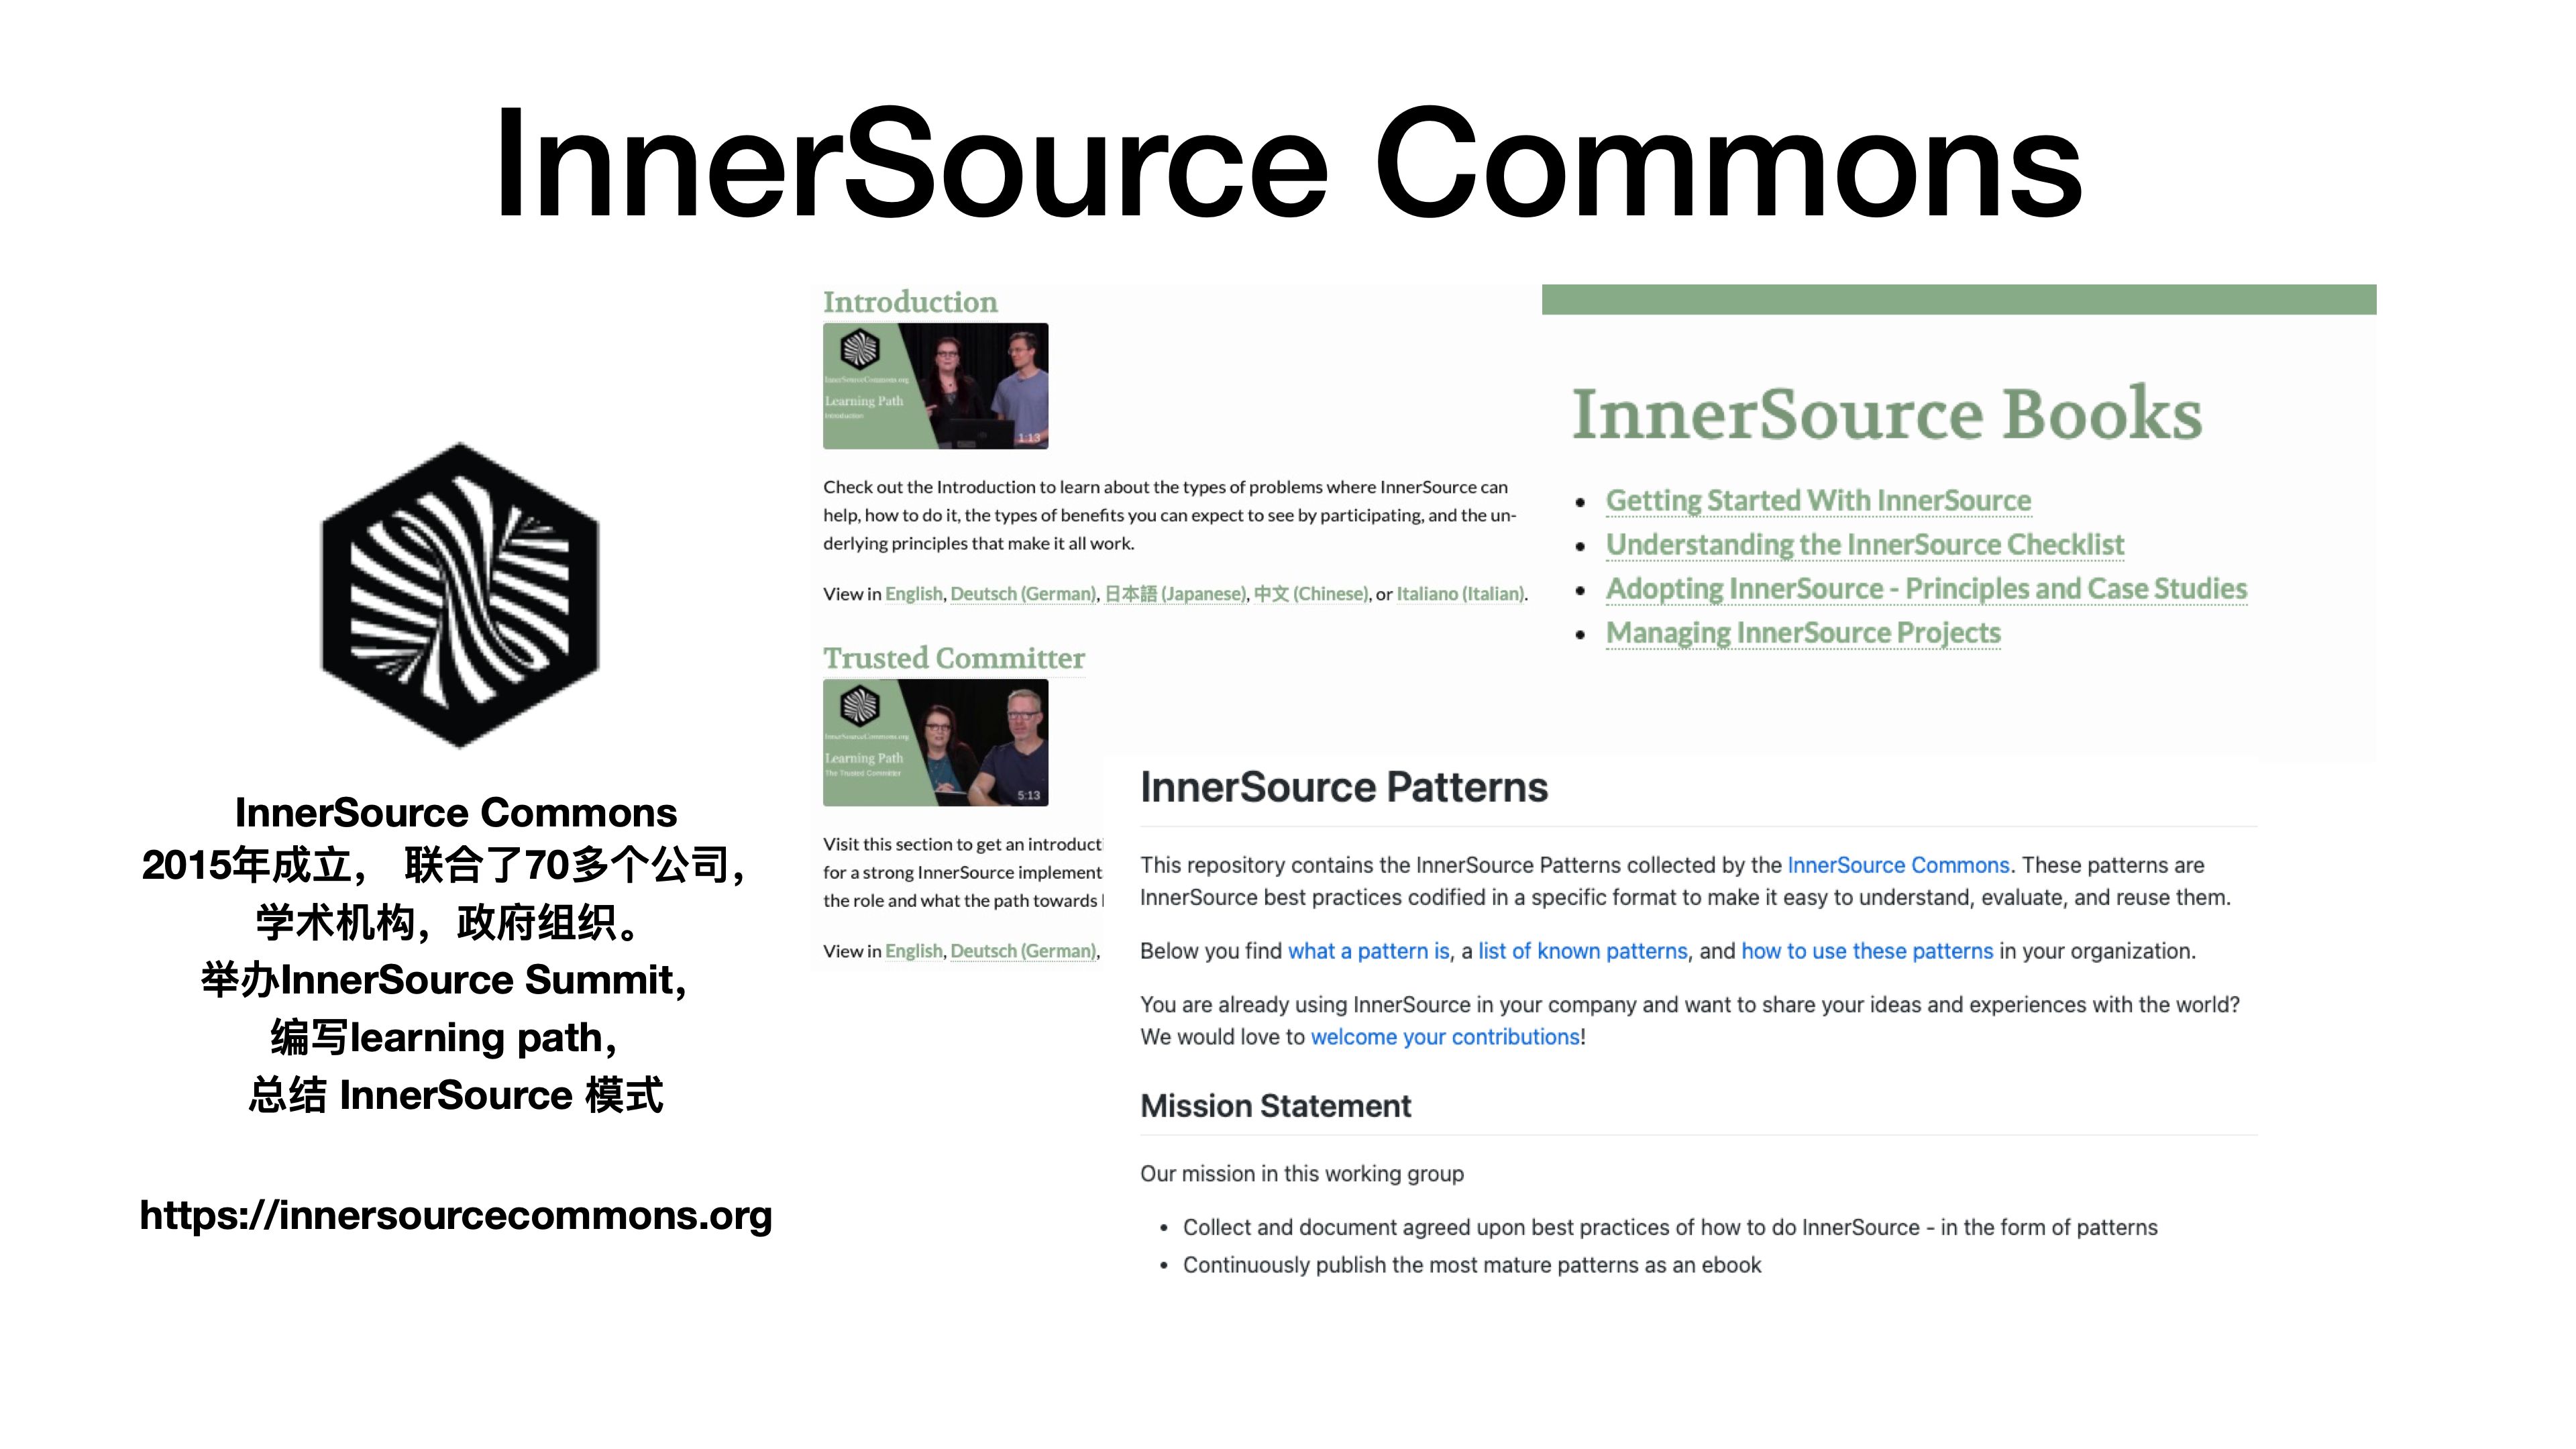 image-innersource-commons